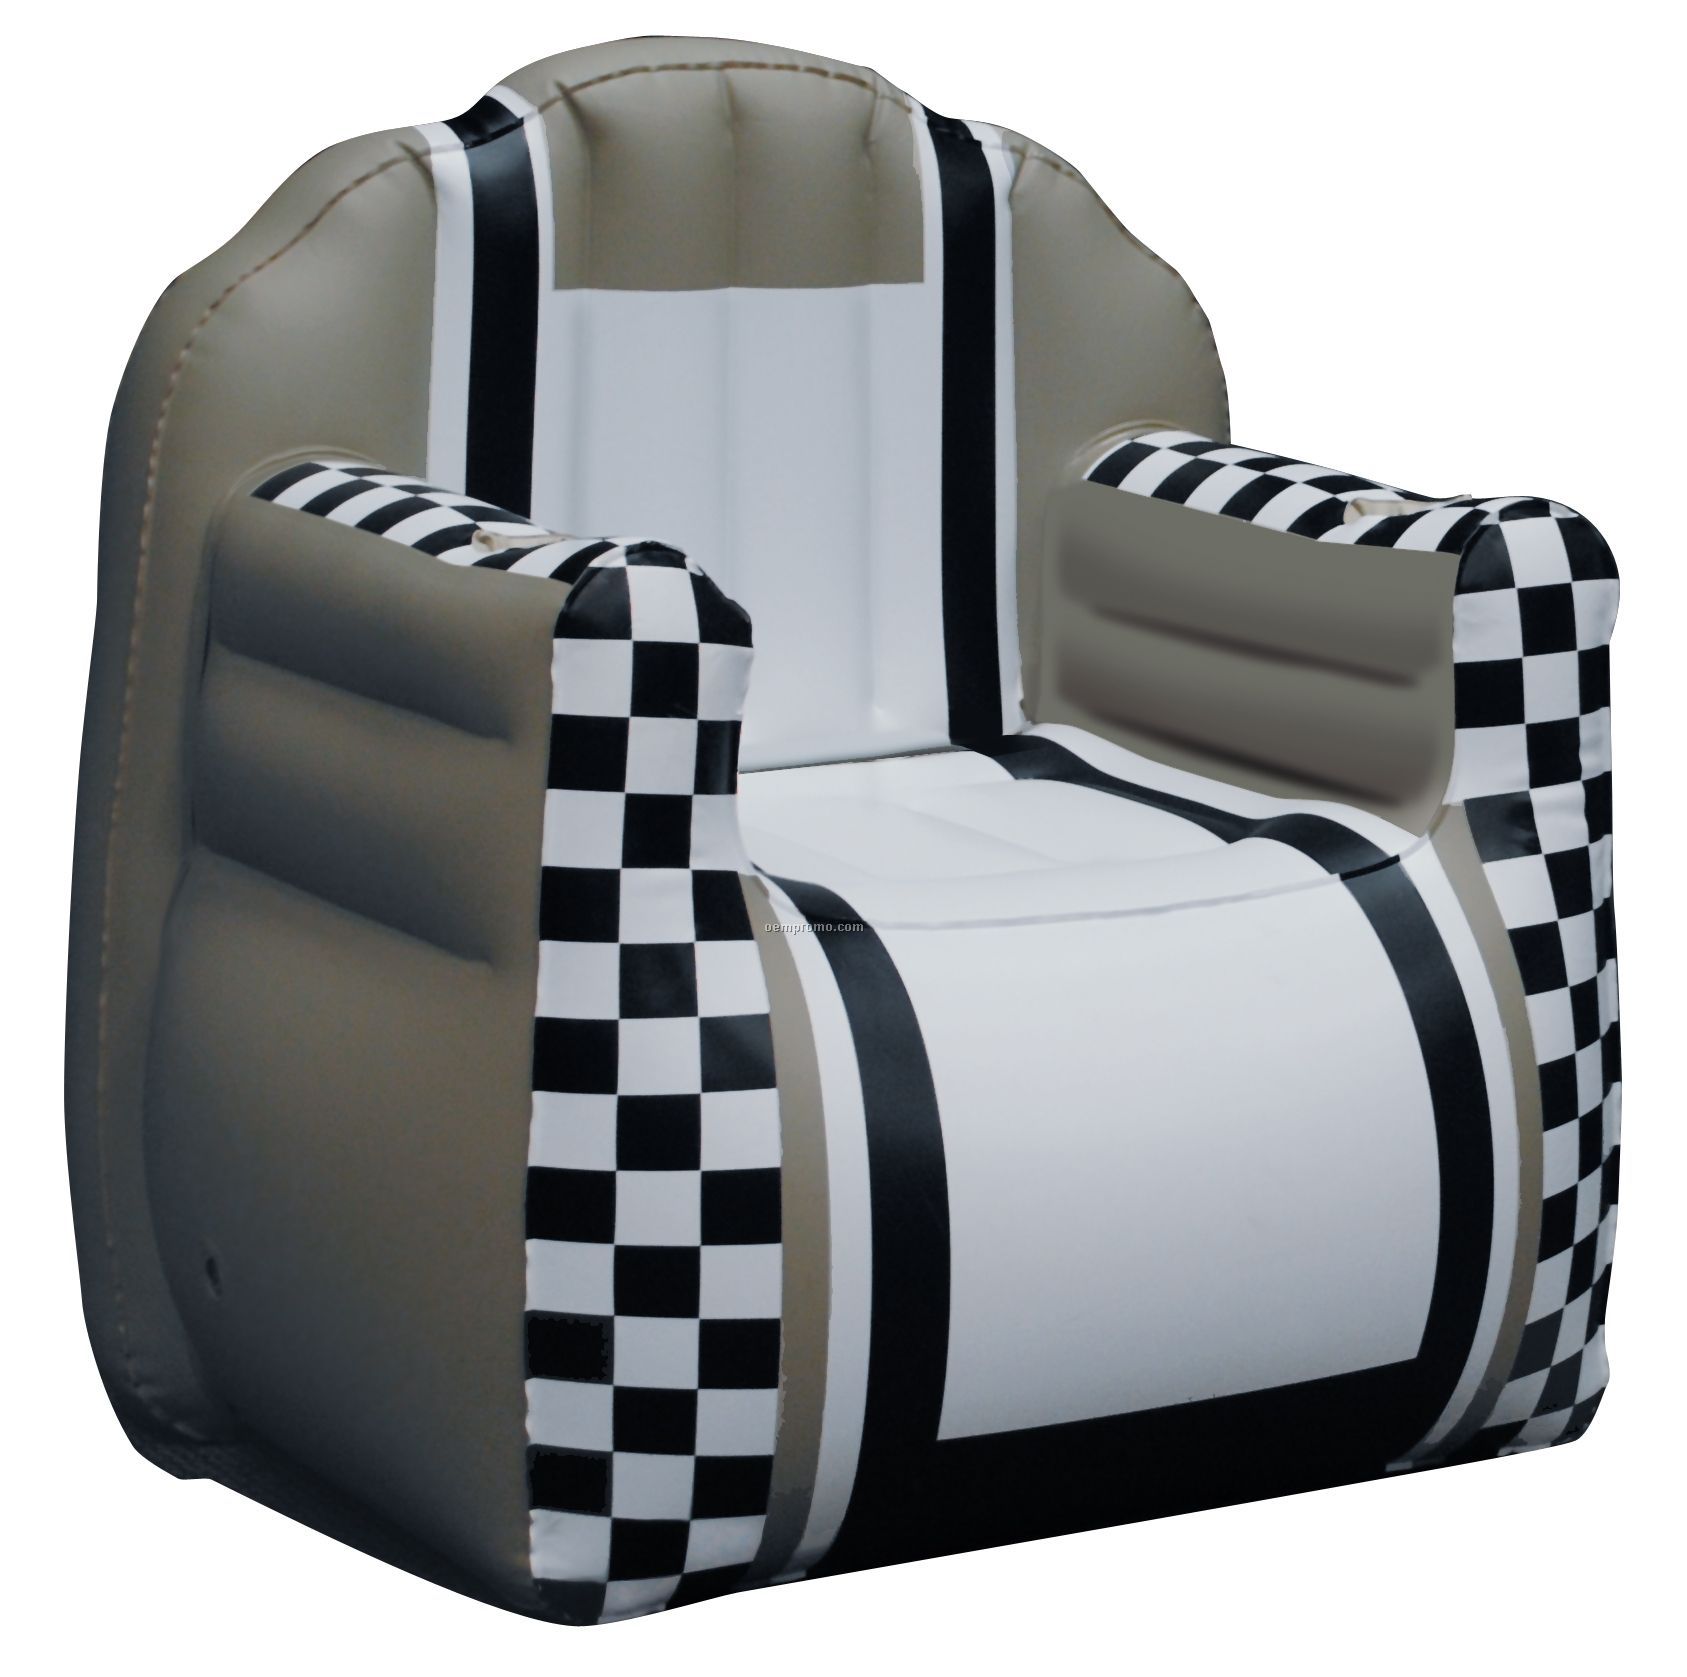 Inflate-a-seat 